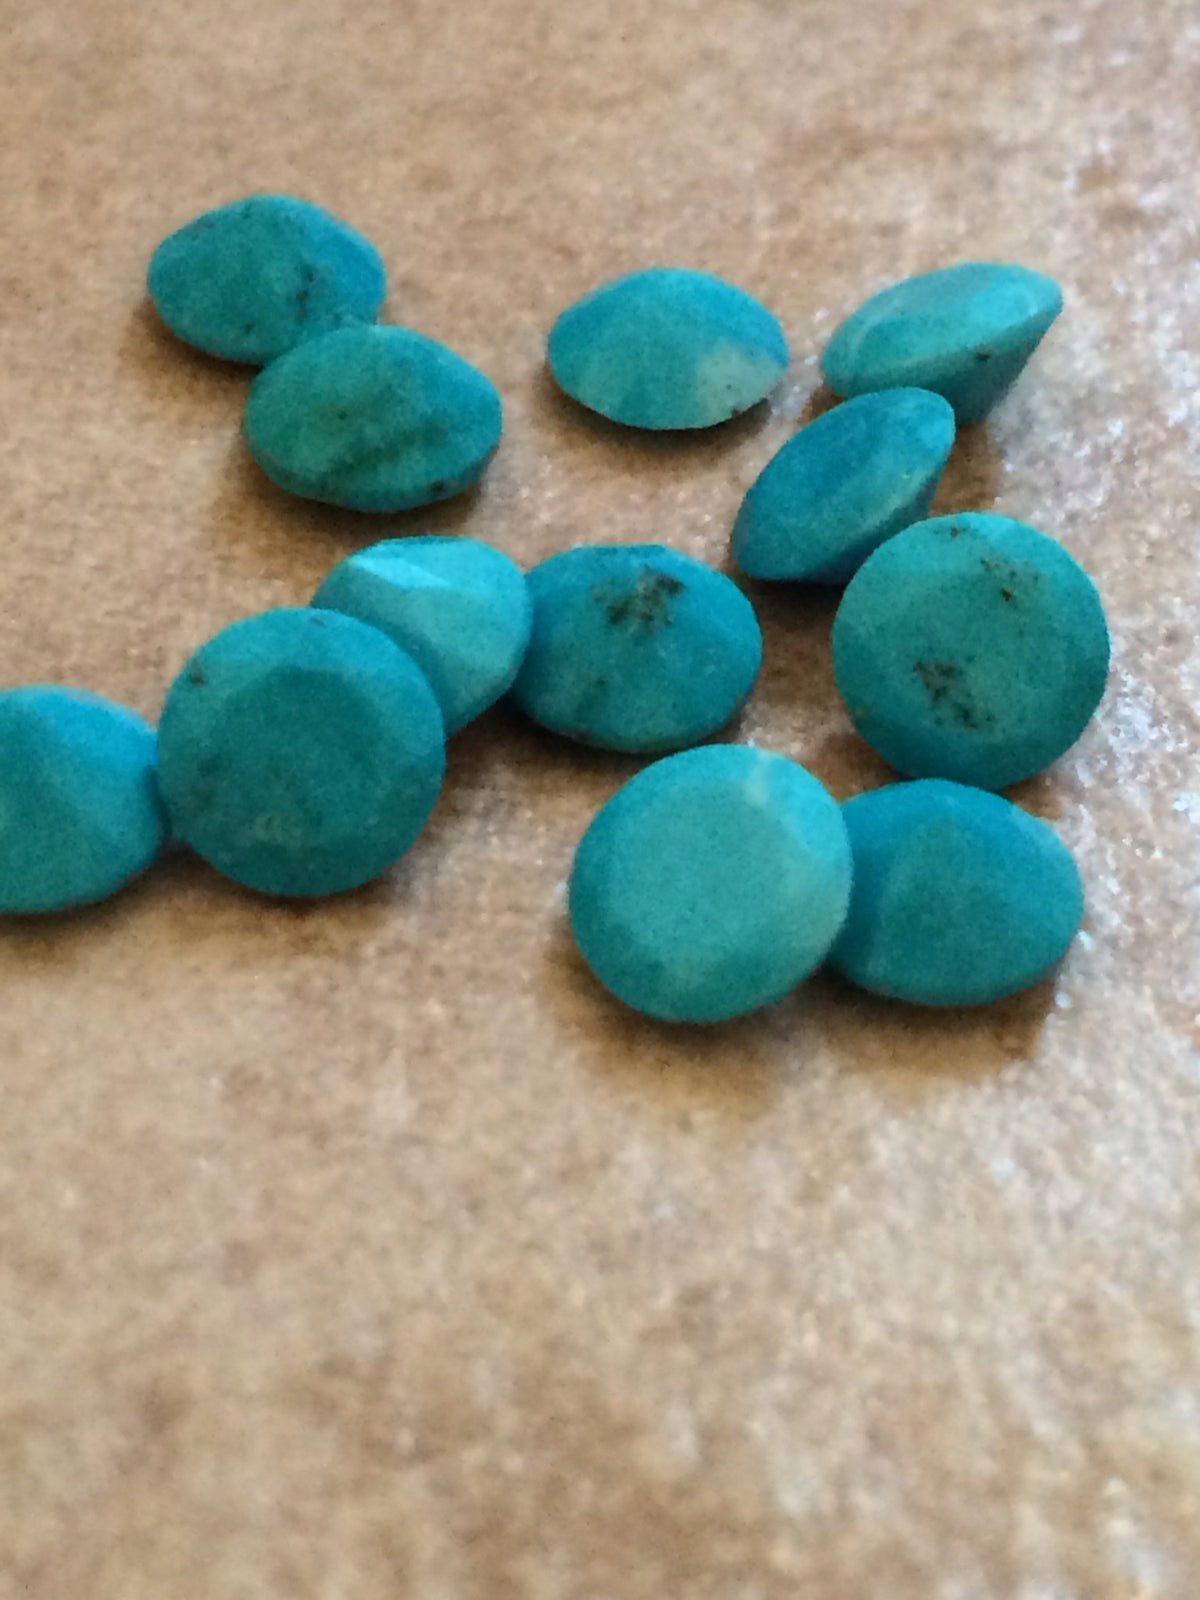 Turquoise (Natural) Faceted Cabochon Round 5mm (5pc)